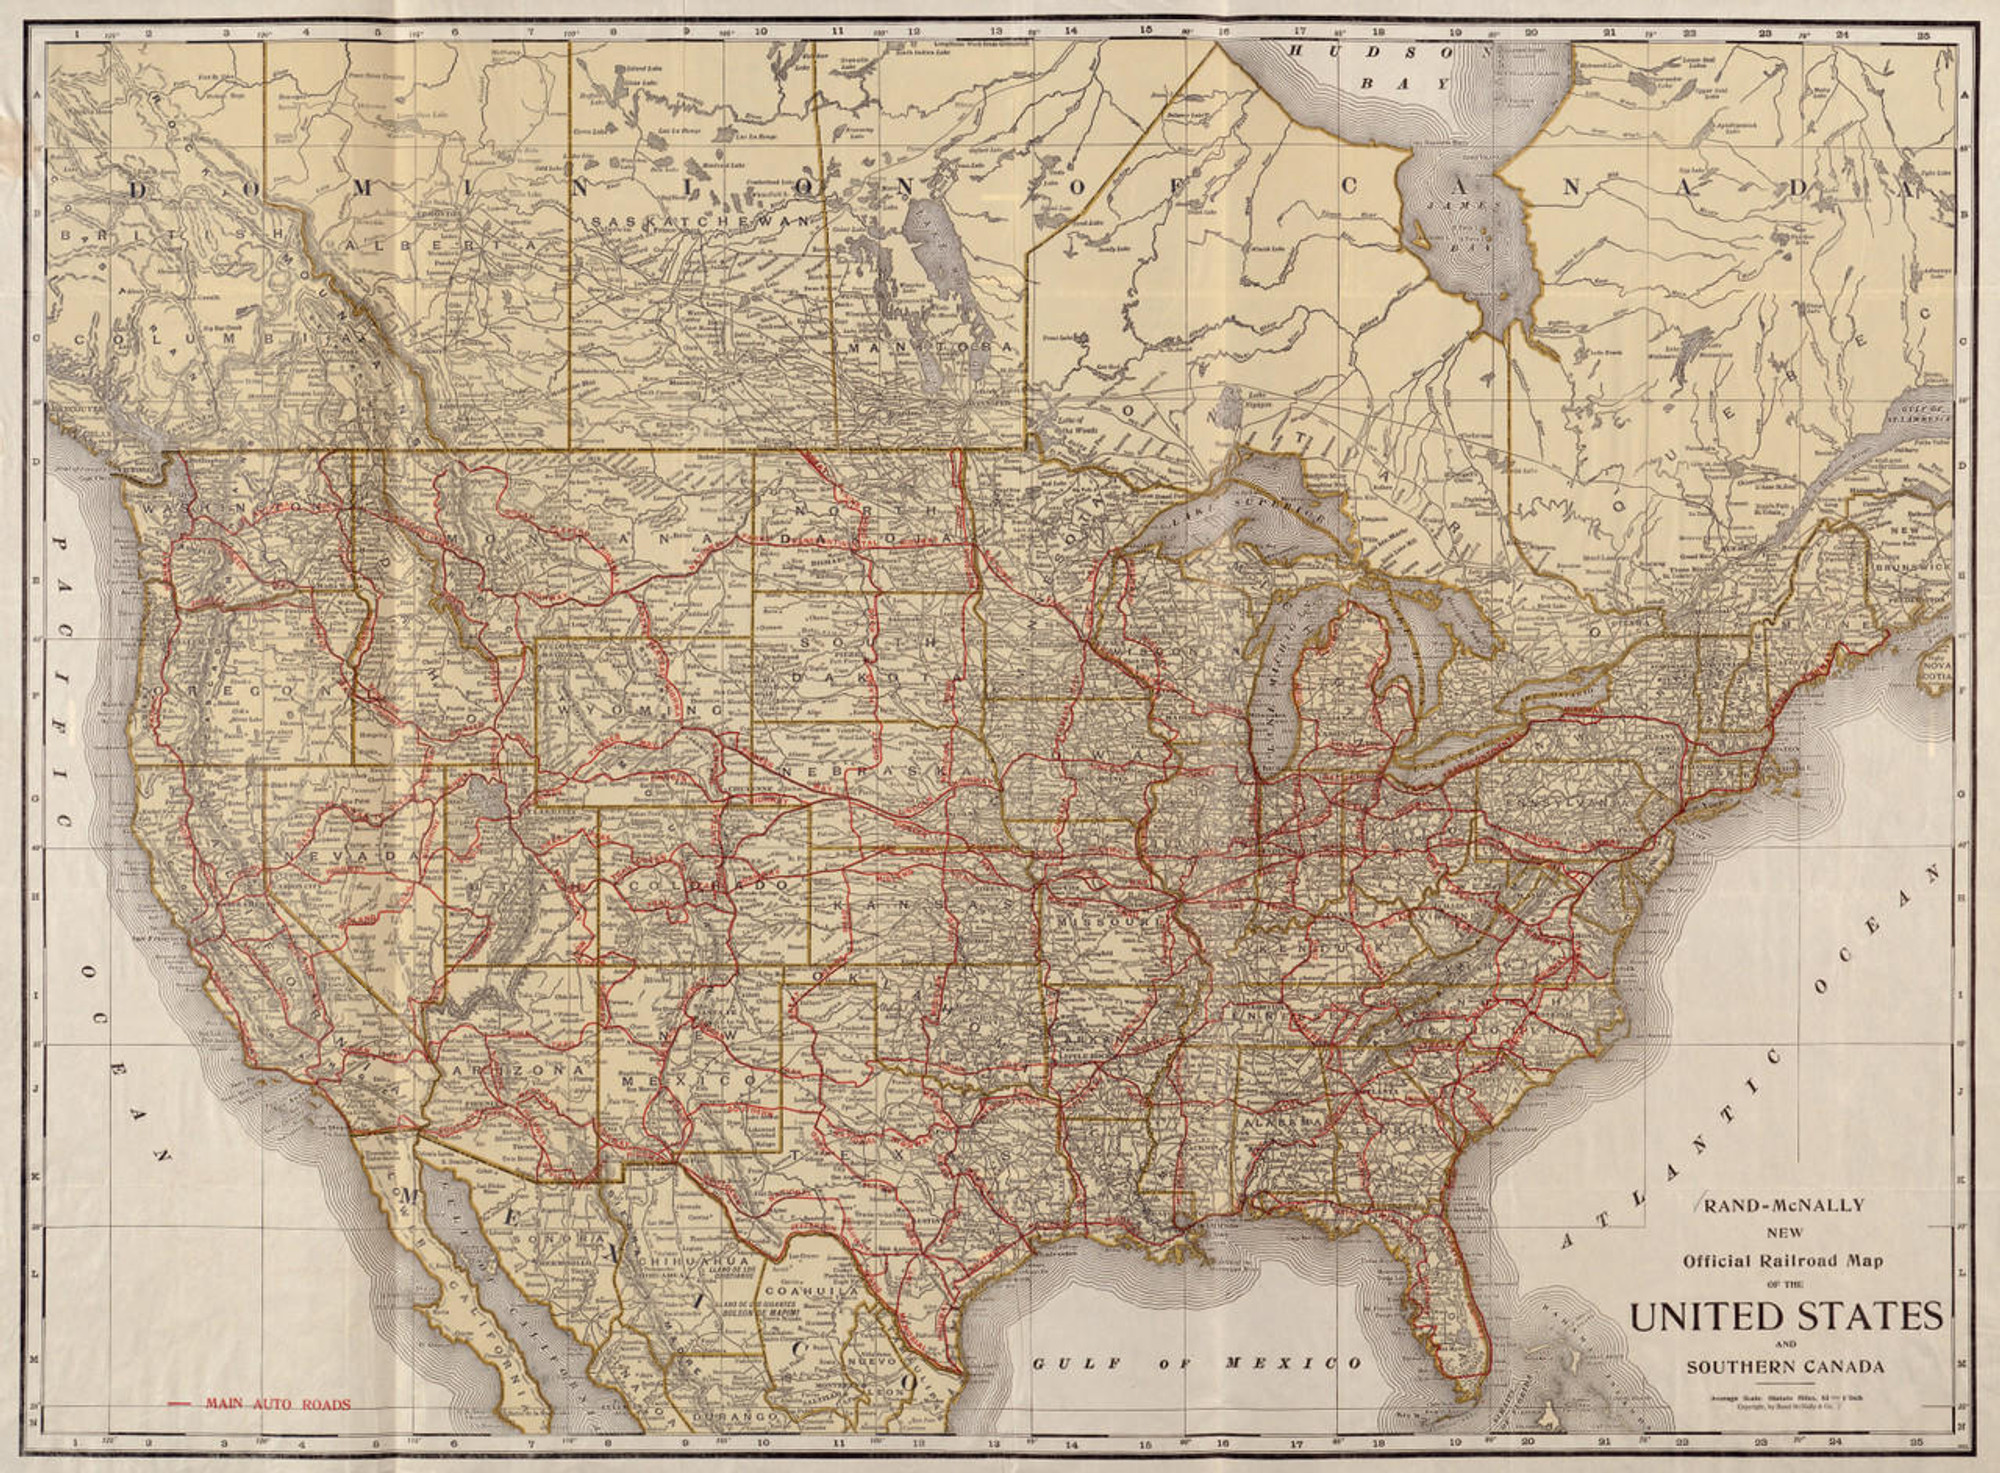 Historic Railroad Map of the United States - 1920, image 1, World Maps Online